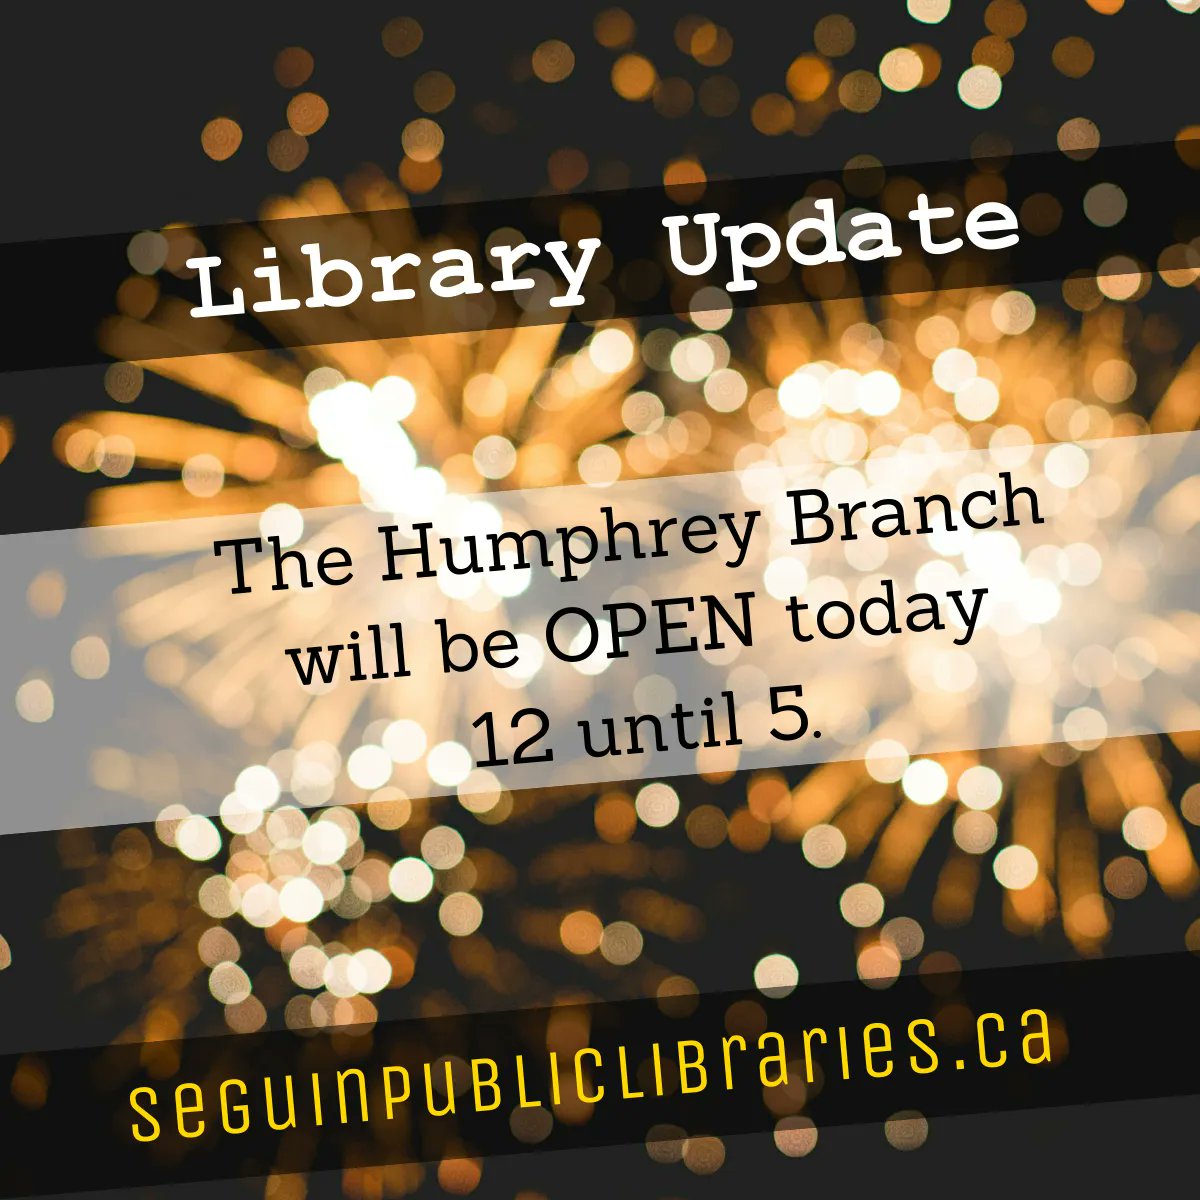 📢 Good News Update:  The Humphrey Branch will be OPEN today (Thursday, January 5th) 12 until 5.  Check out some New Books for the New Year!  We can help with that resolution to read more.  📖🌟 #libraryupdate #goodnews #seguinpubliclibrariesON #seguinON